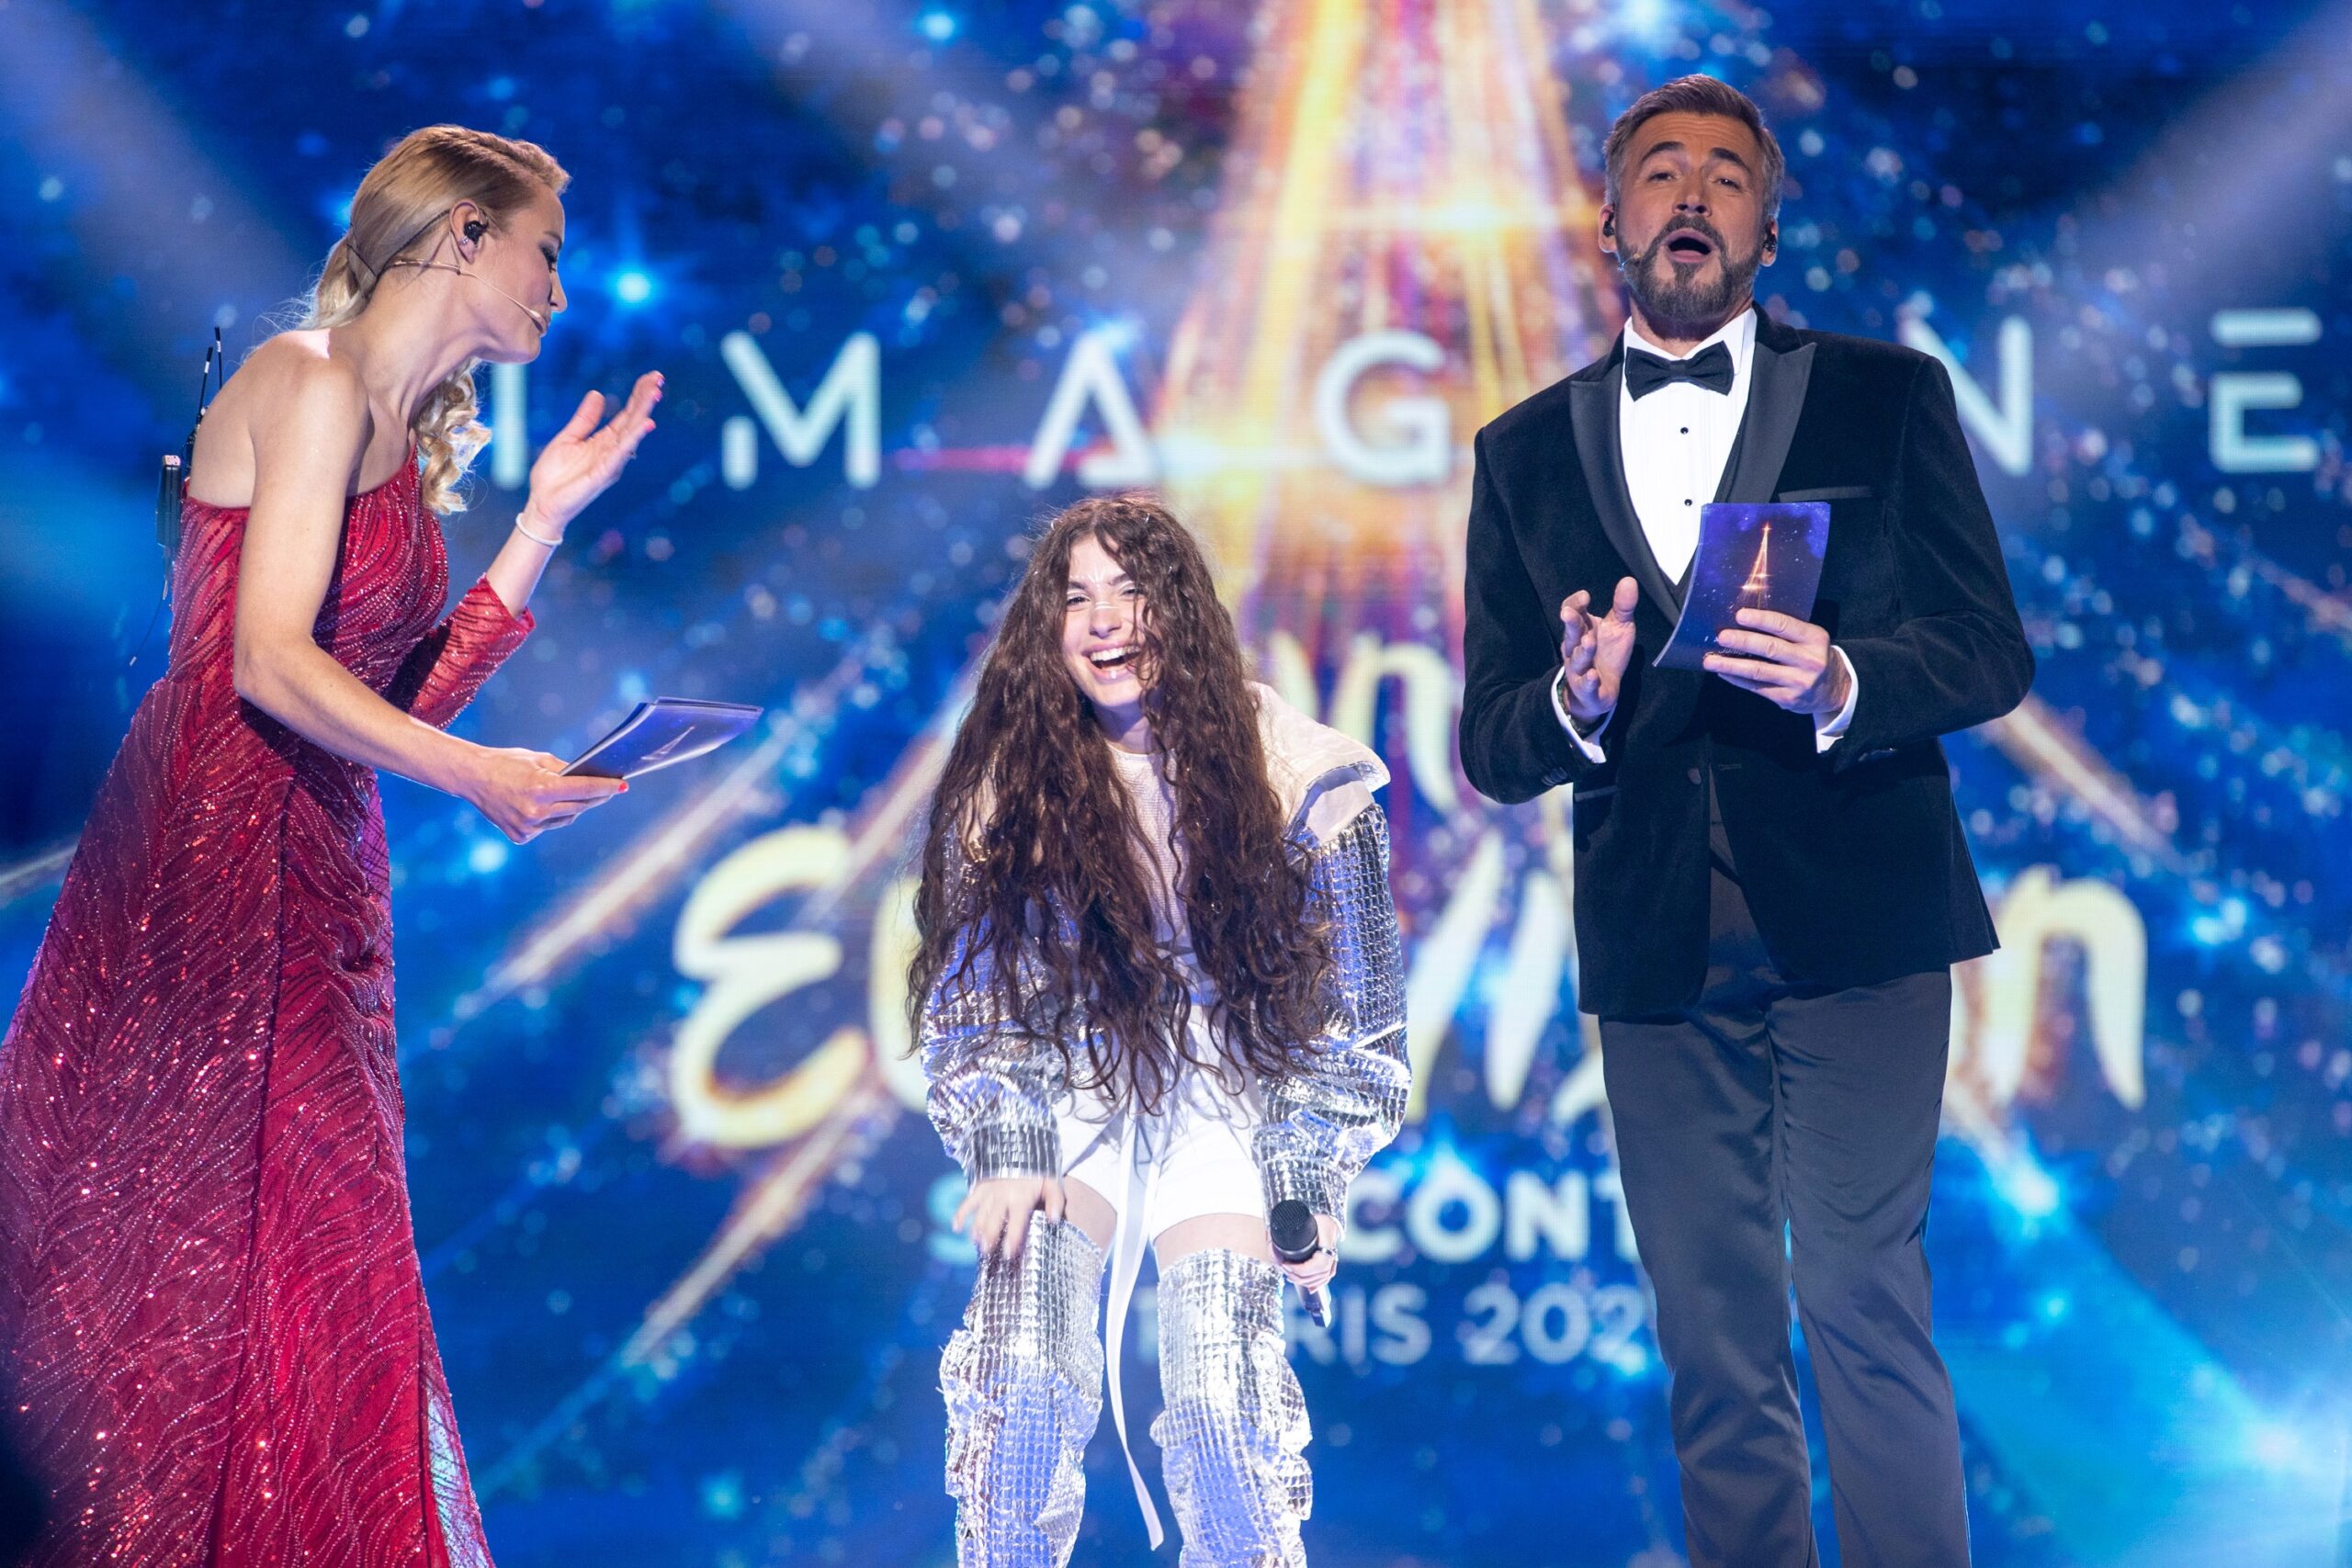 Junior Eurovision is Back! Applications are now open for 2022